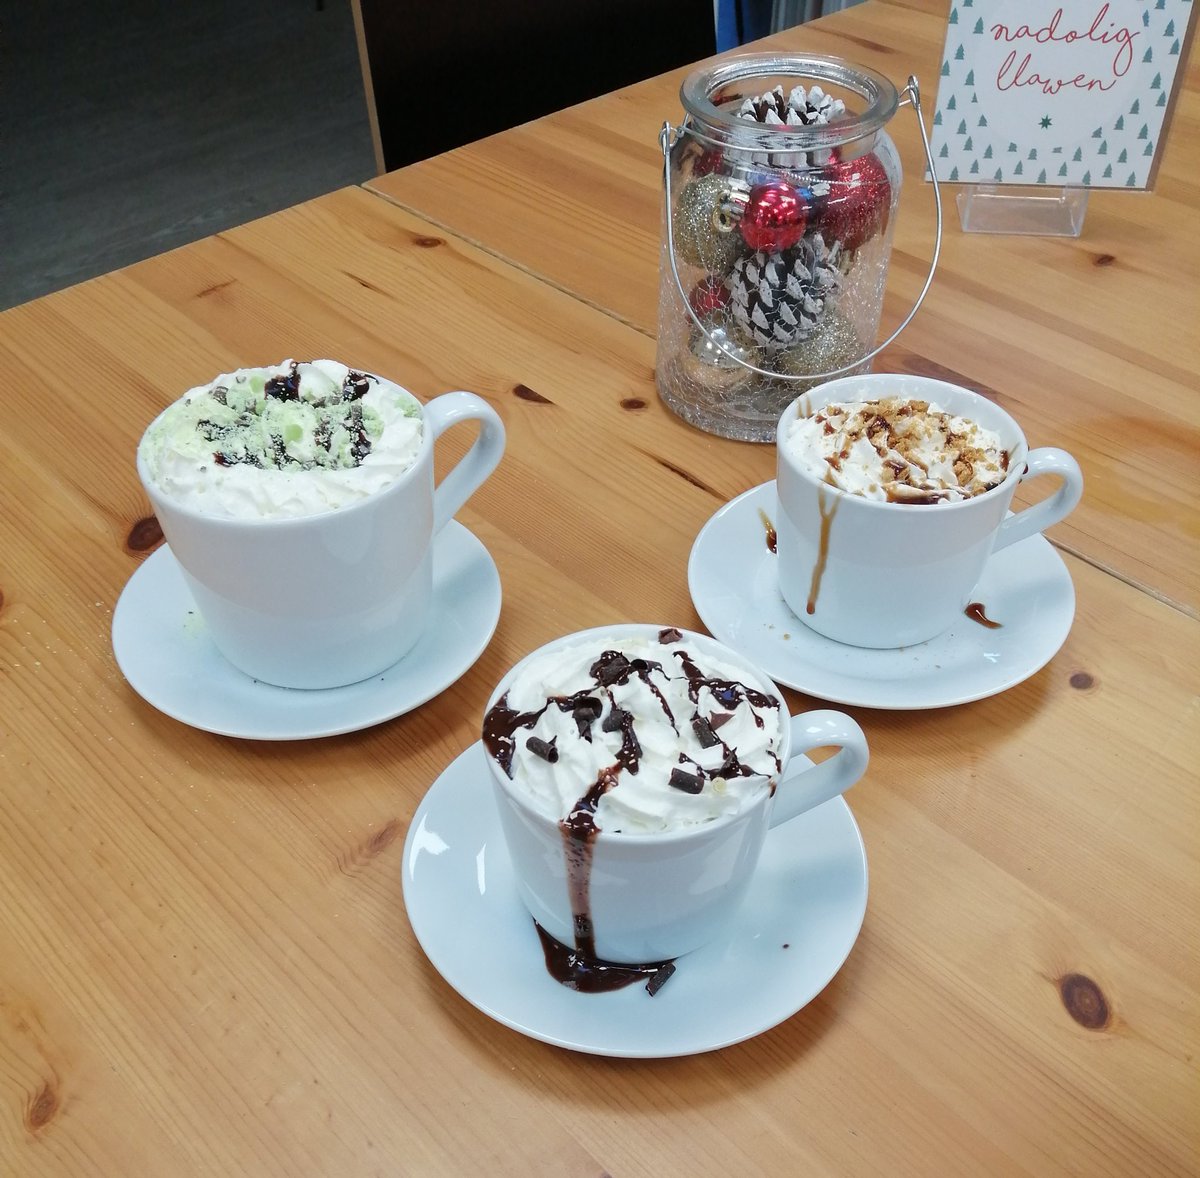 #treatyourself to one of our #festive drinks.. Mint hot chocolate Gingerbread latte Chocolate hazelnut mocha Also available to take away #itsbeginningtolookalotlikechristmas #stasaph #carucymru #lovelivelocal